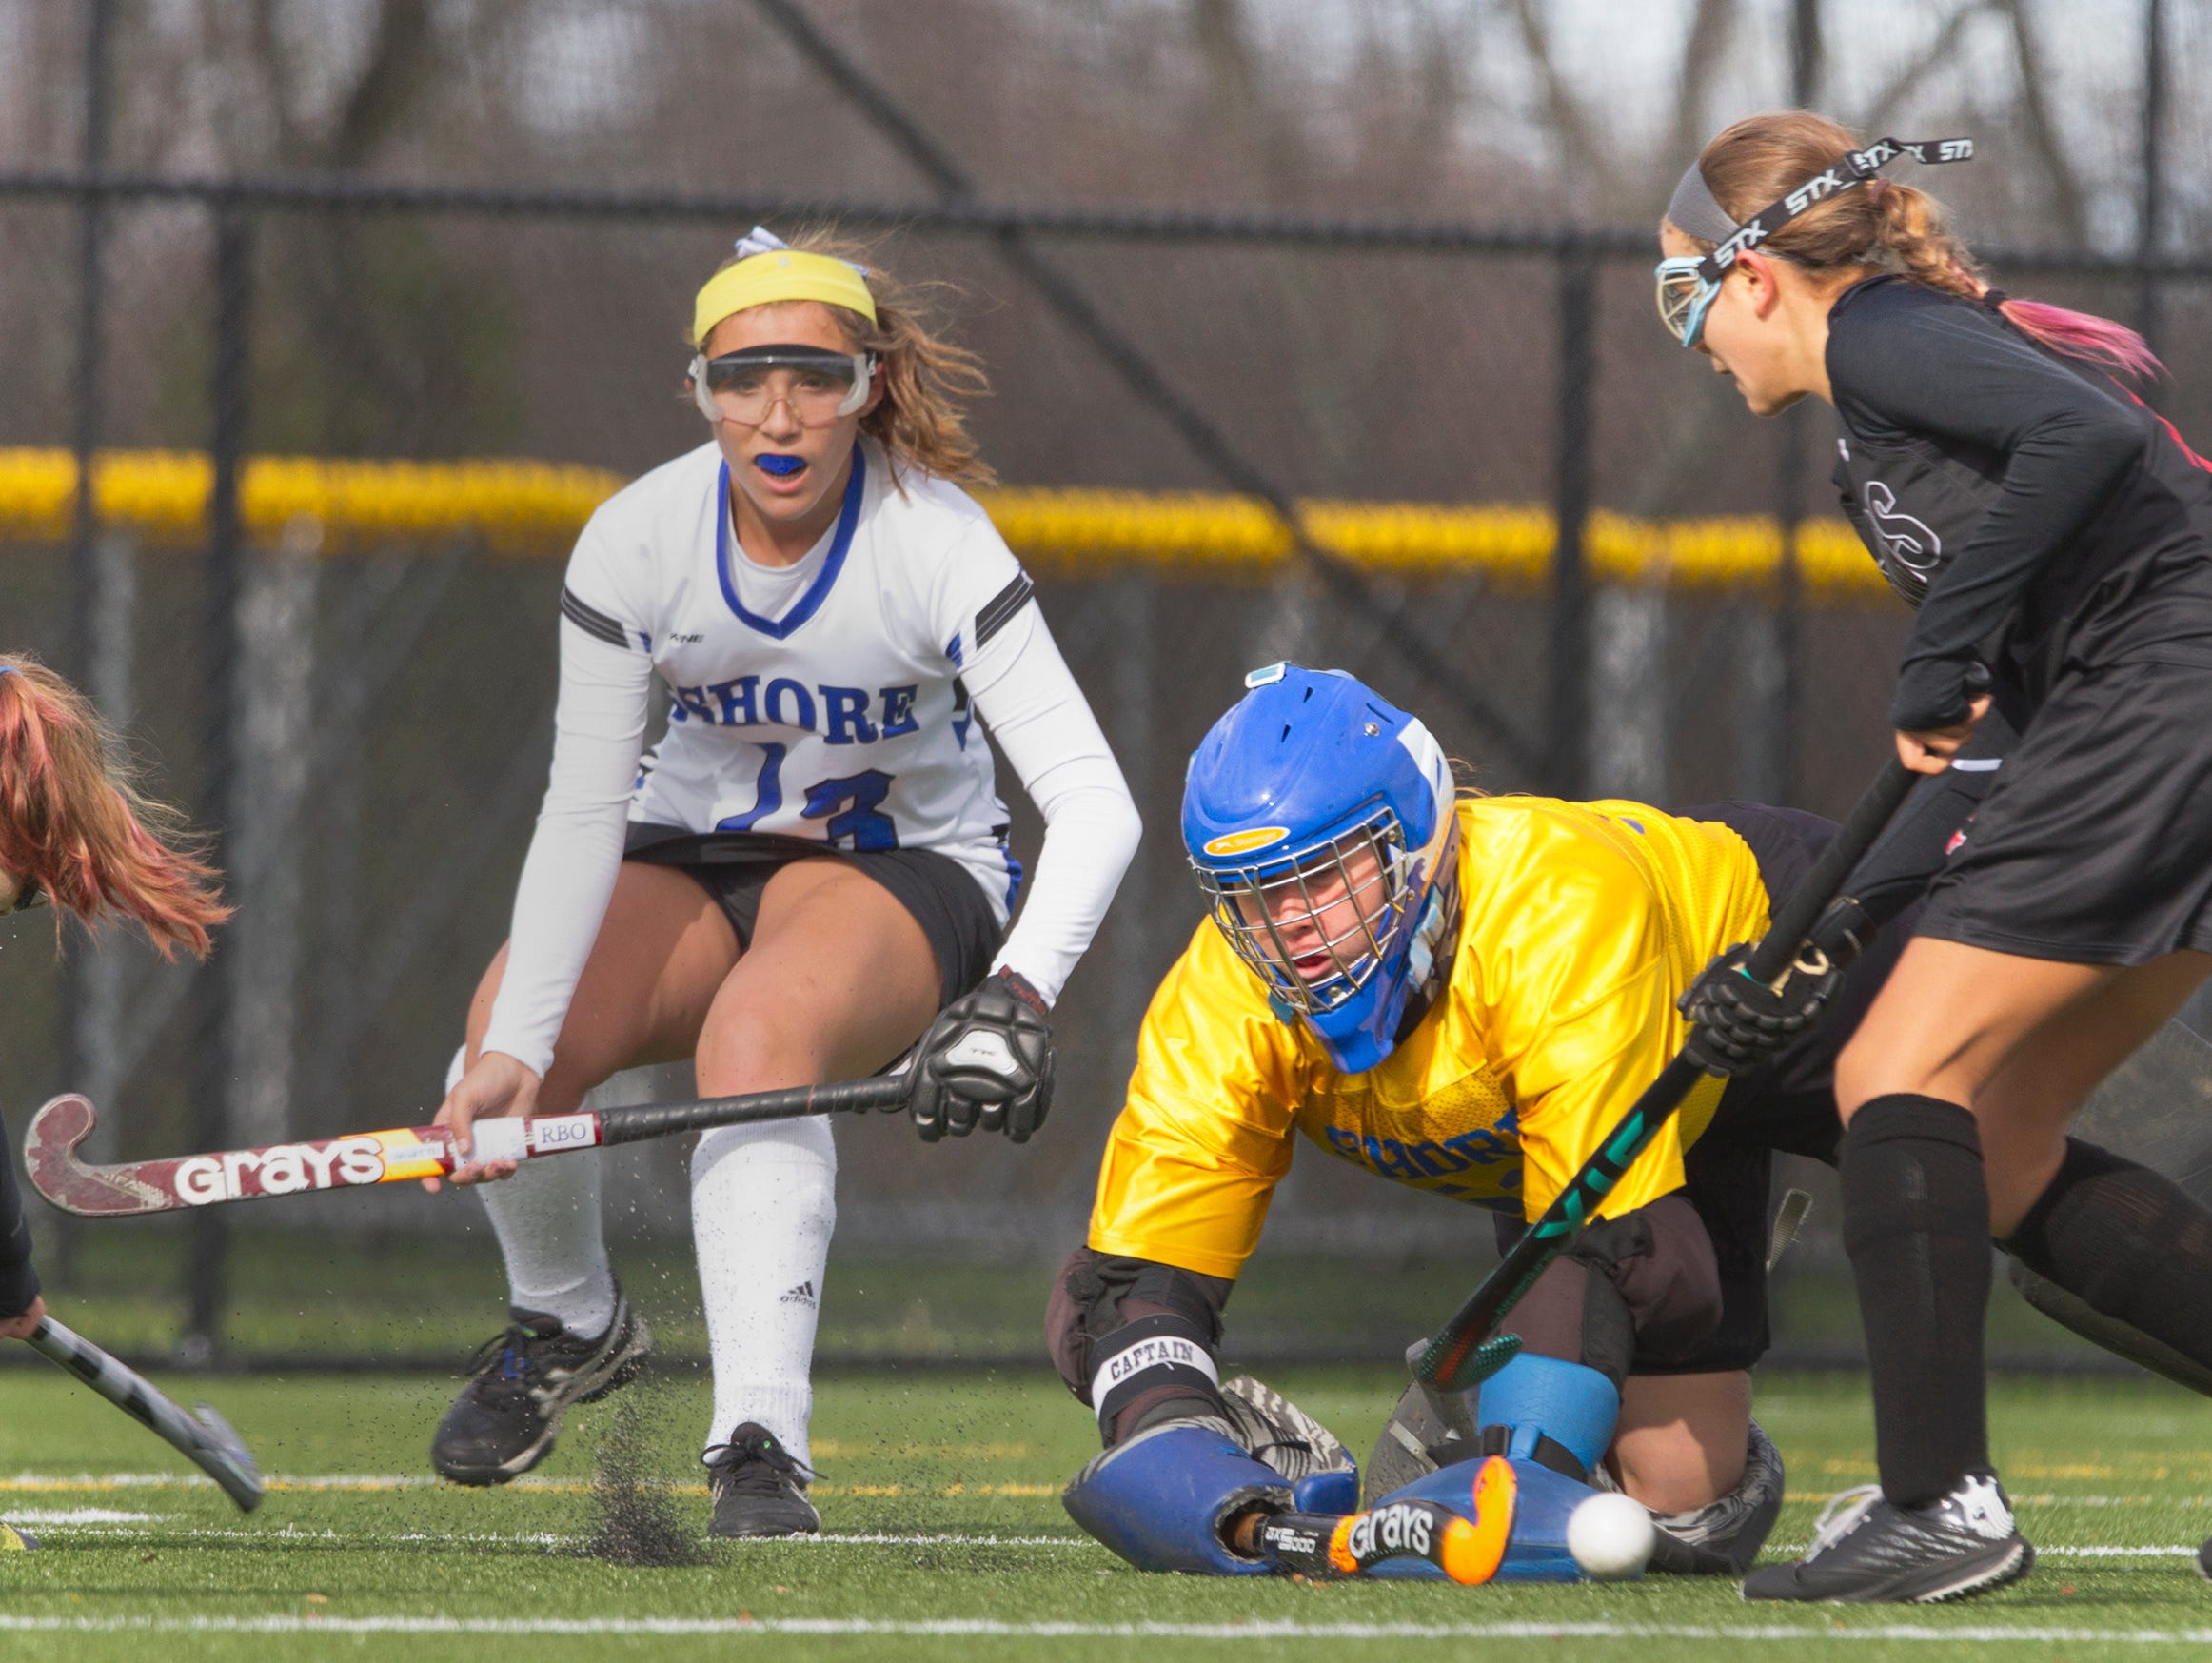 Shore Regional's Sarah Dwyer dives to block shots on goal during first half action, backed up by teammate Nicole LaMorte. Shore Regional defeats Haddonfield 3-0 in NJSIAA Group I State Final in Bordentown, NJ on November 14, 2015